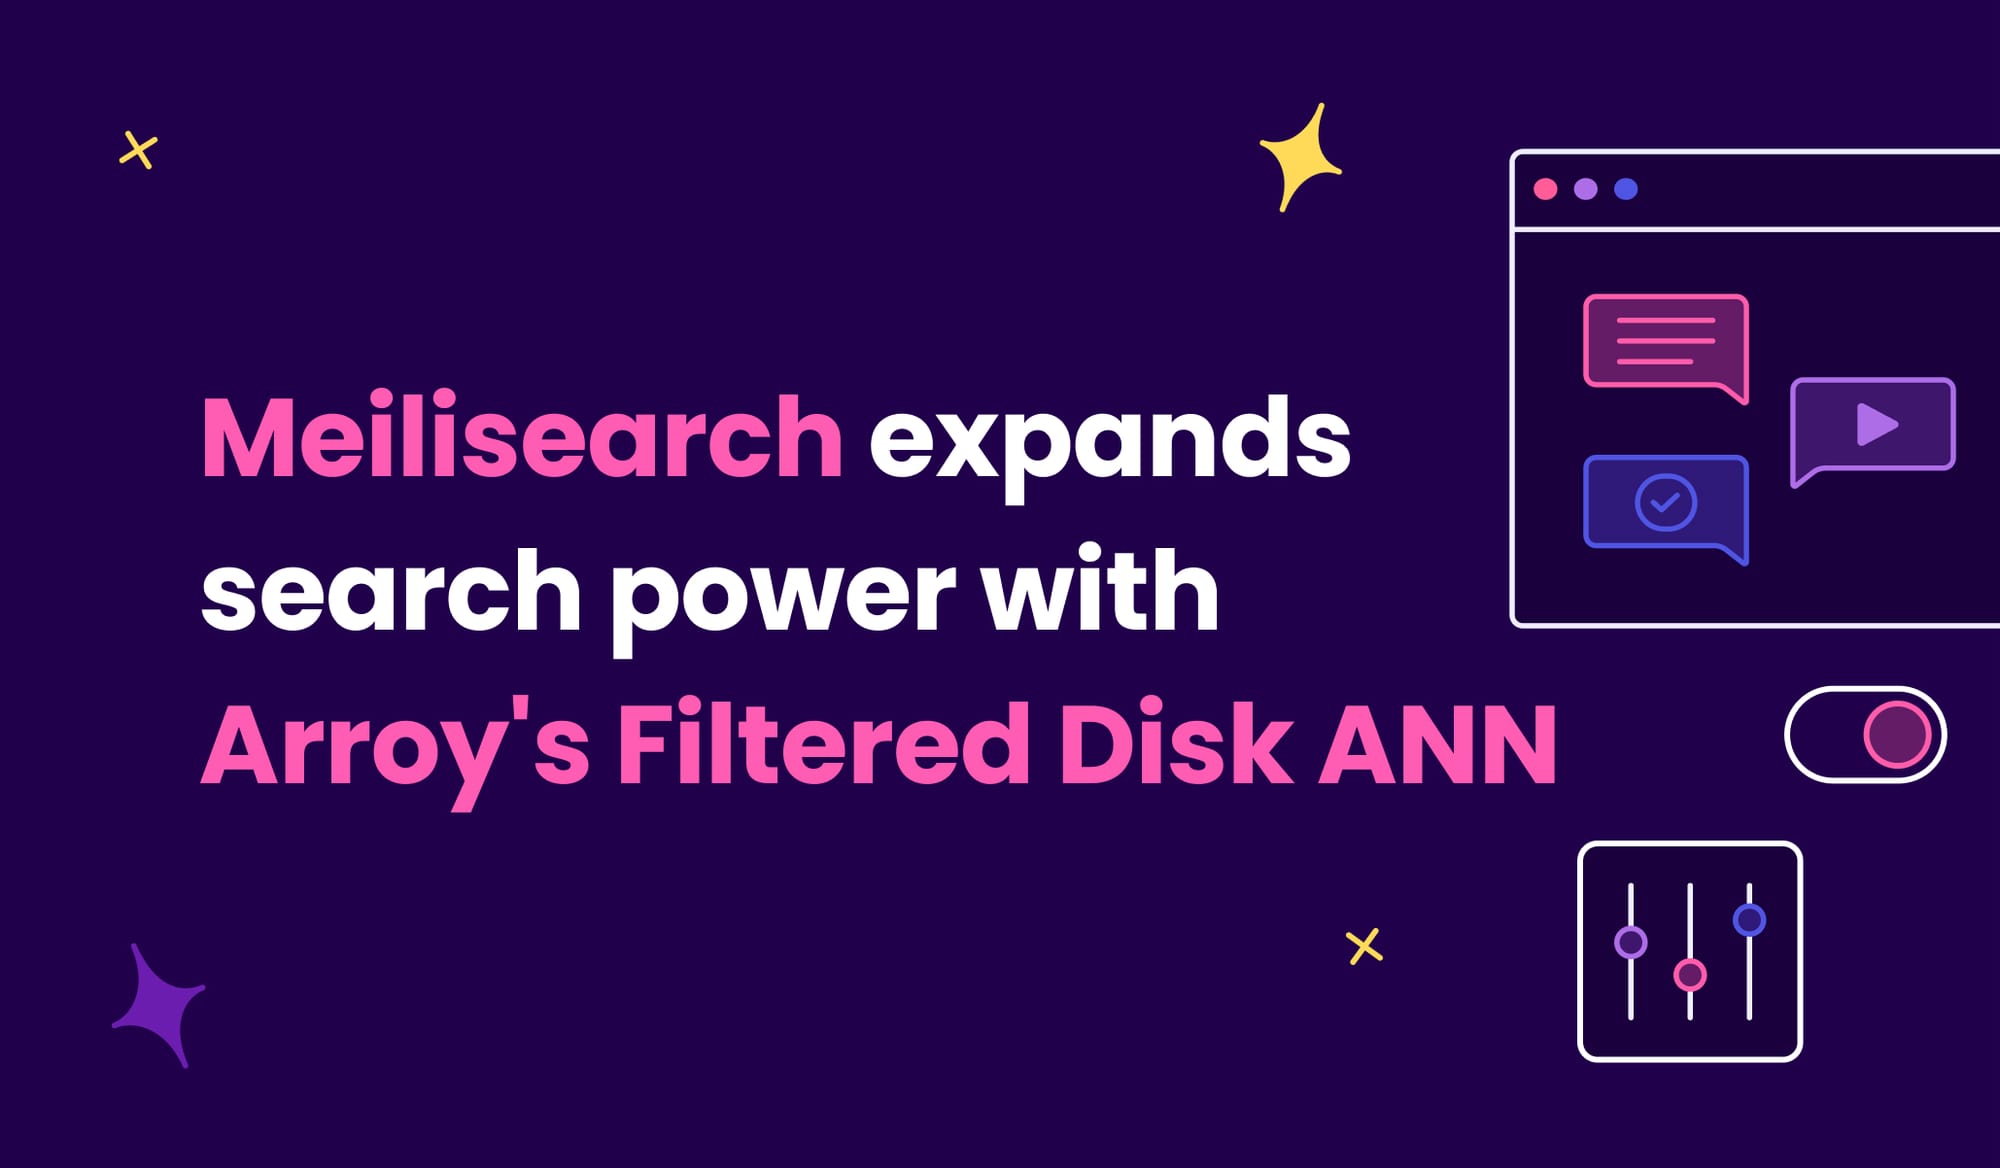 Meilisearch expands search power with Arroy's Filtered Disk ANN